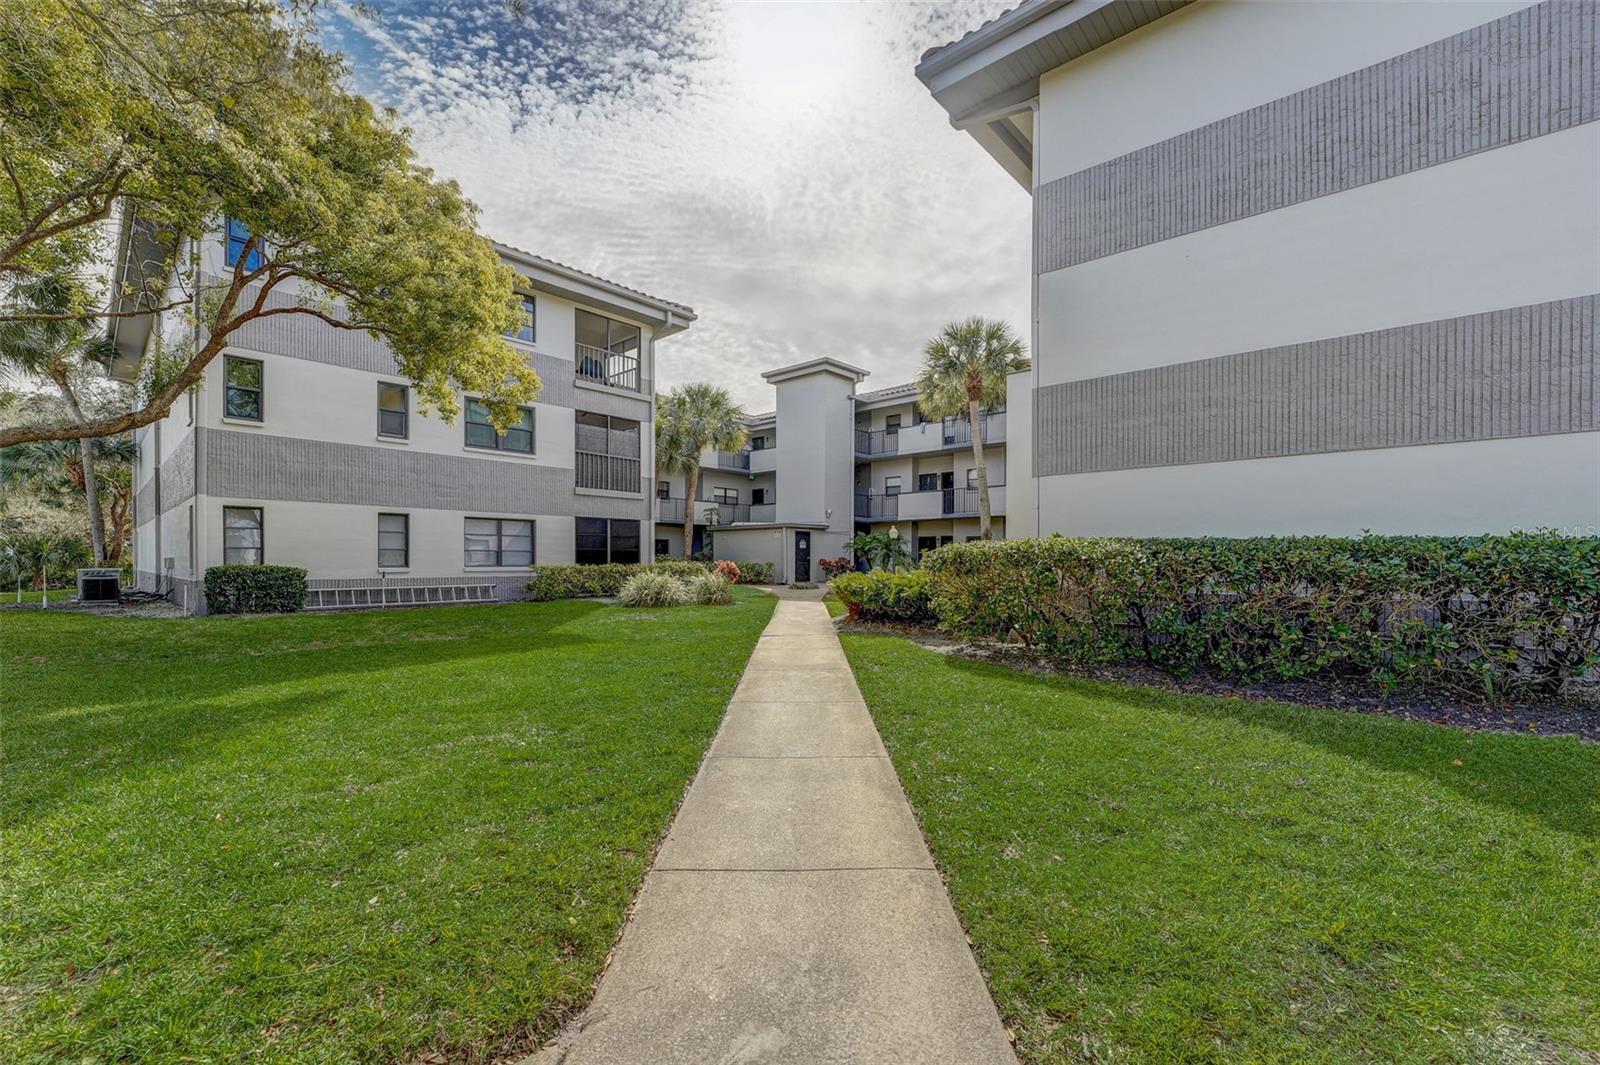 Photo one of 2650 Countryside Blvd # A210 Clearwater FL 33761 | MLS U8227800